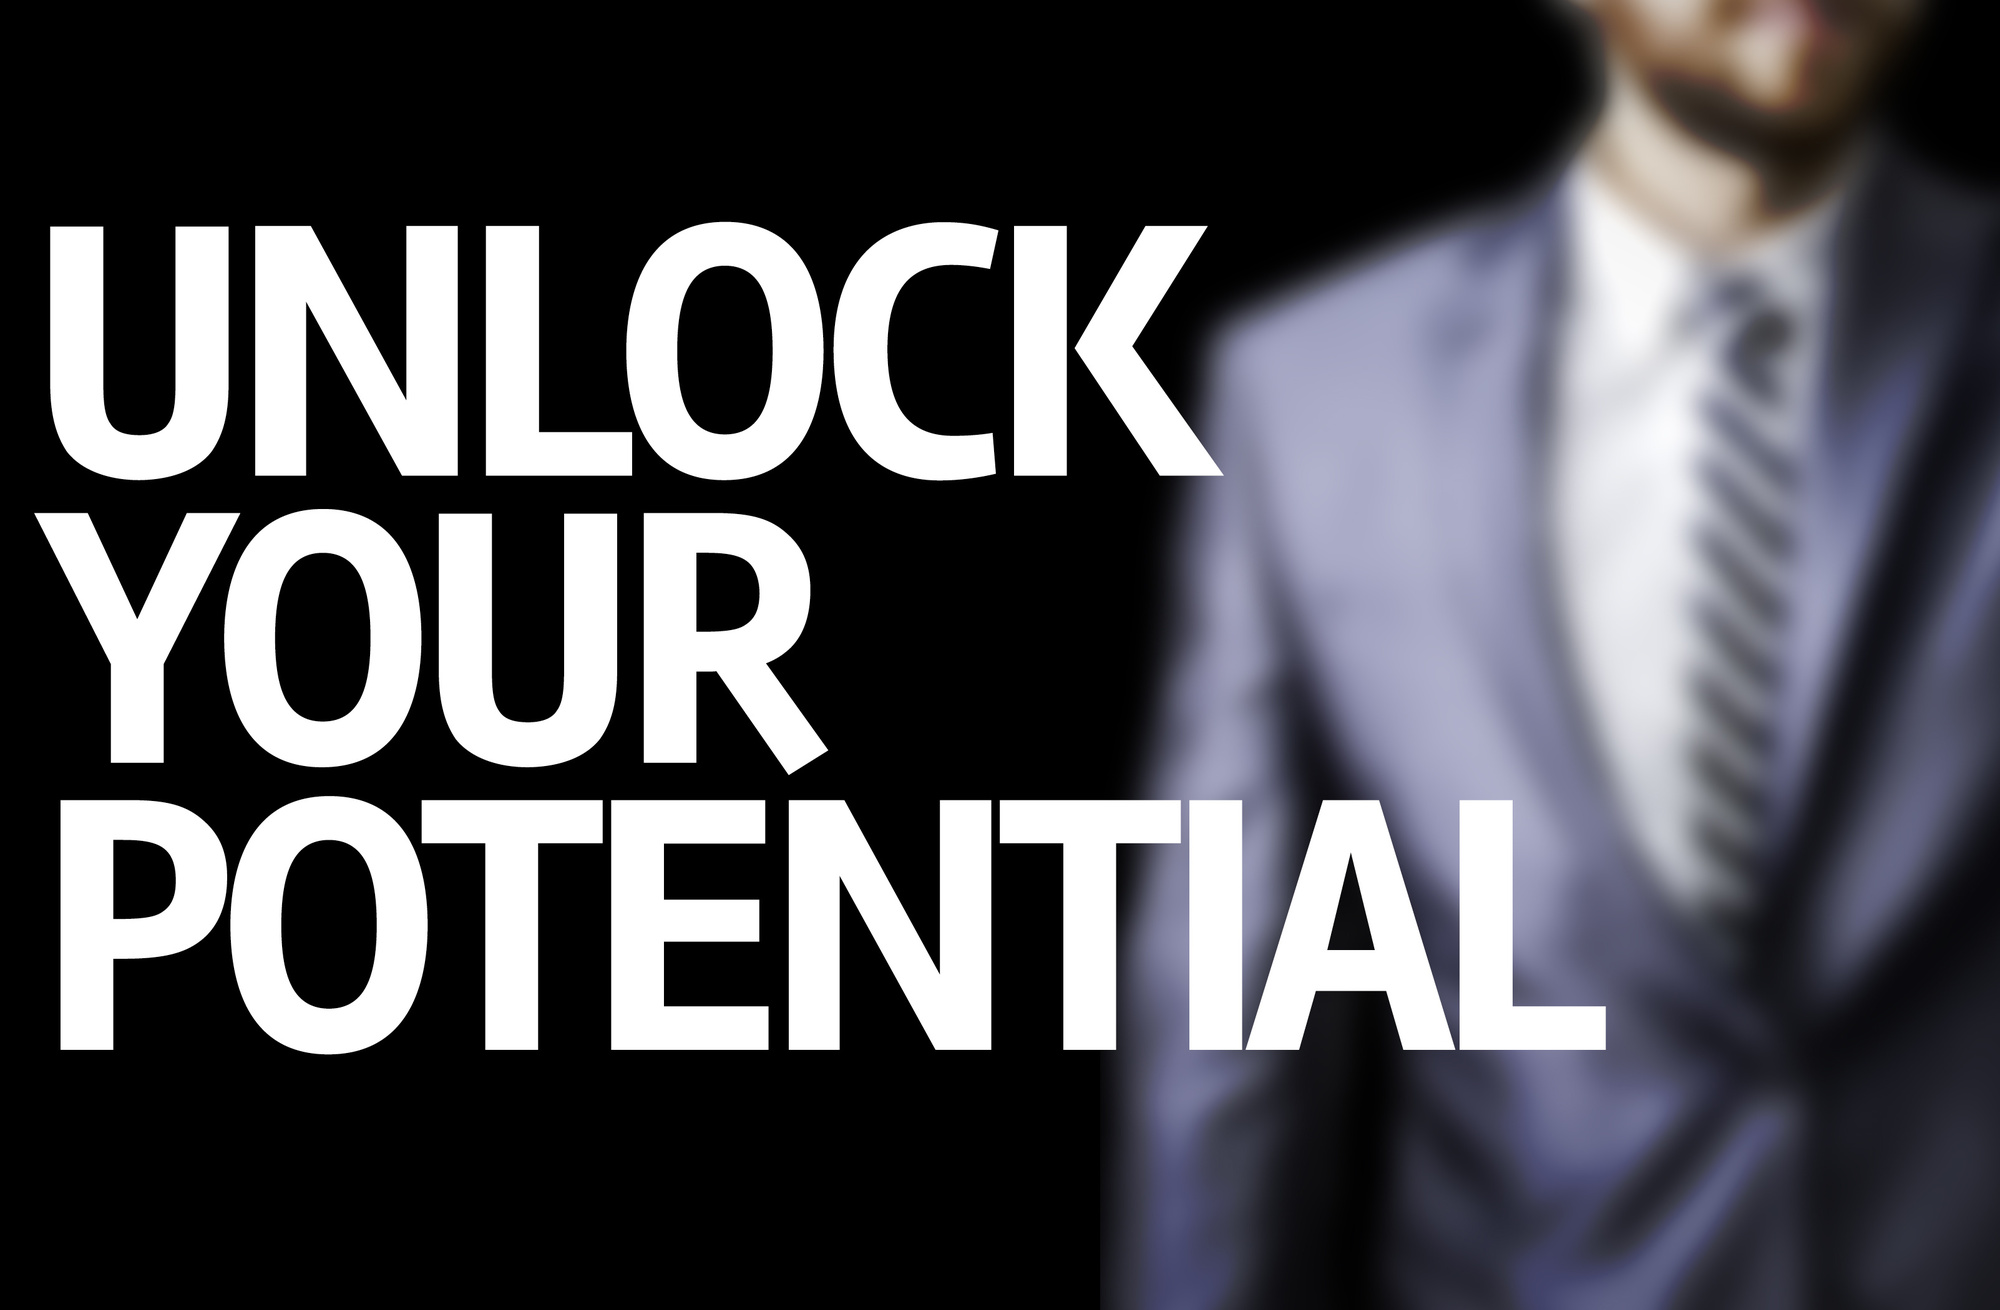 unlock your potential text